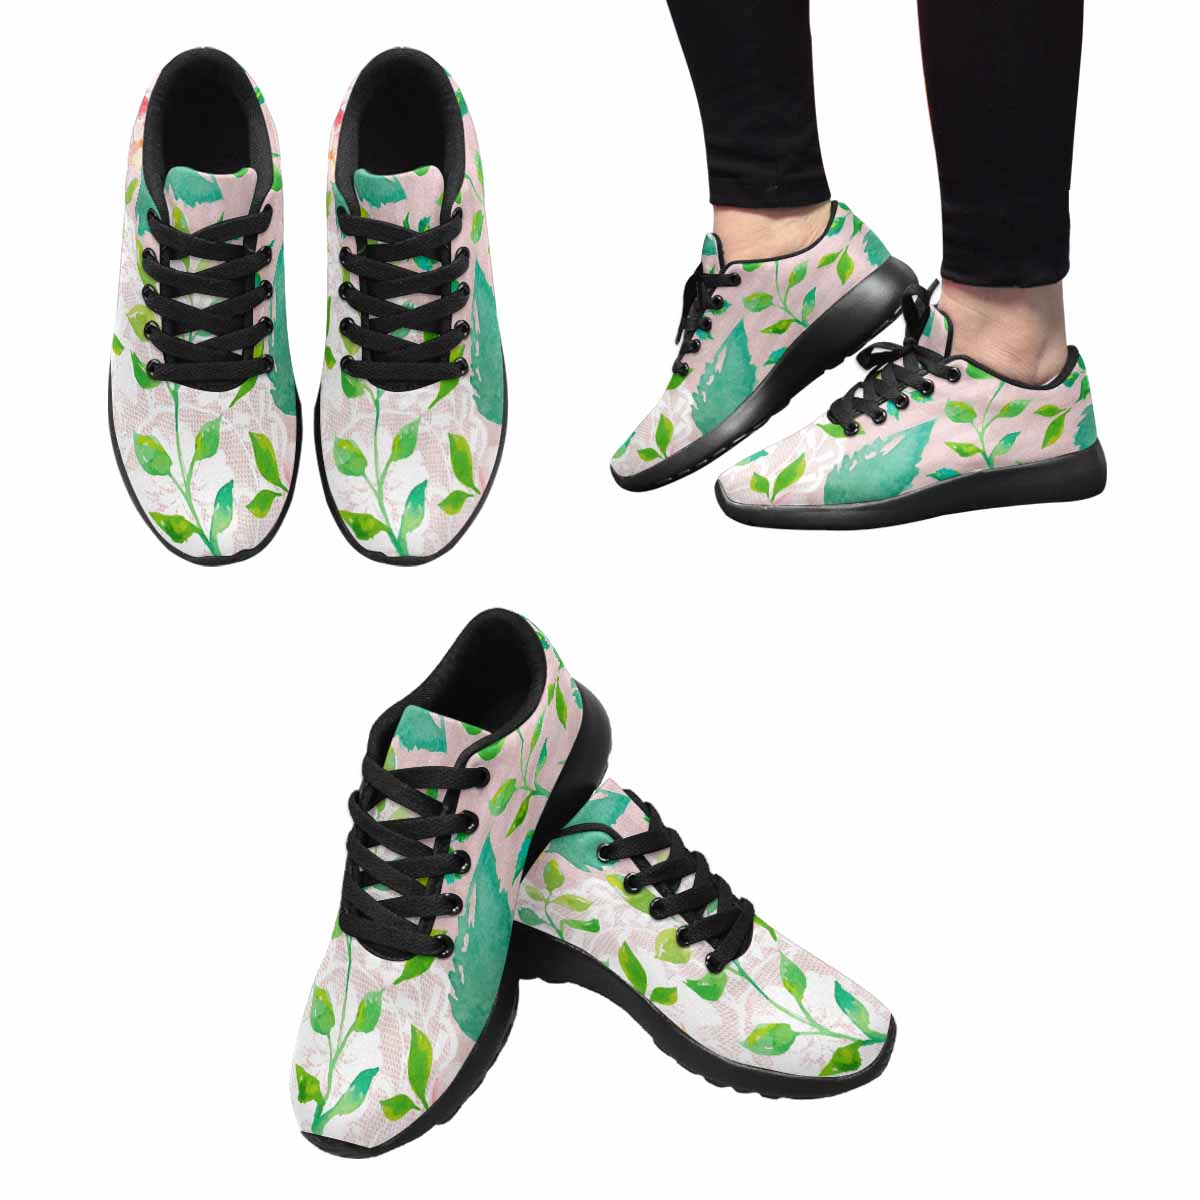 Victorian lace print, womens cute casual or running sneakers, design 21